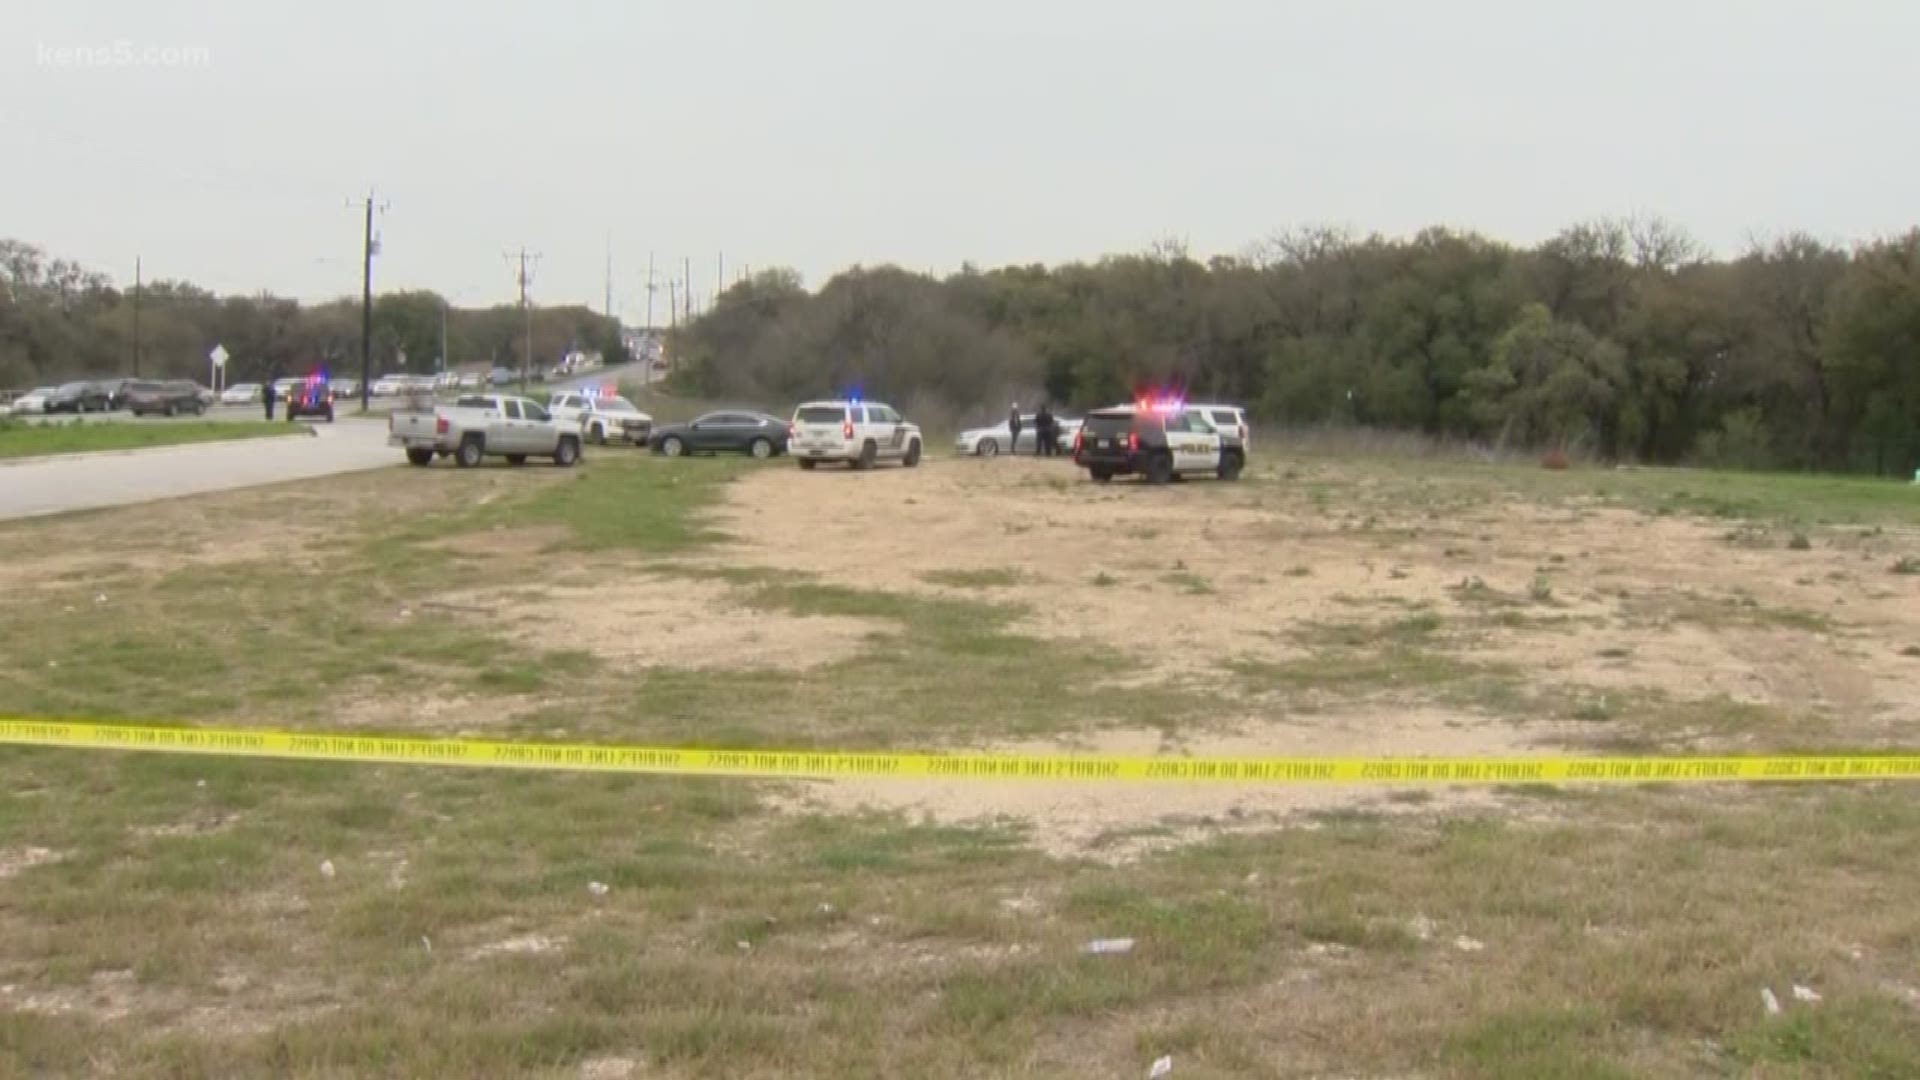 The suspect had intentions to kill the deputy, BCSO officials say.